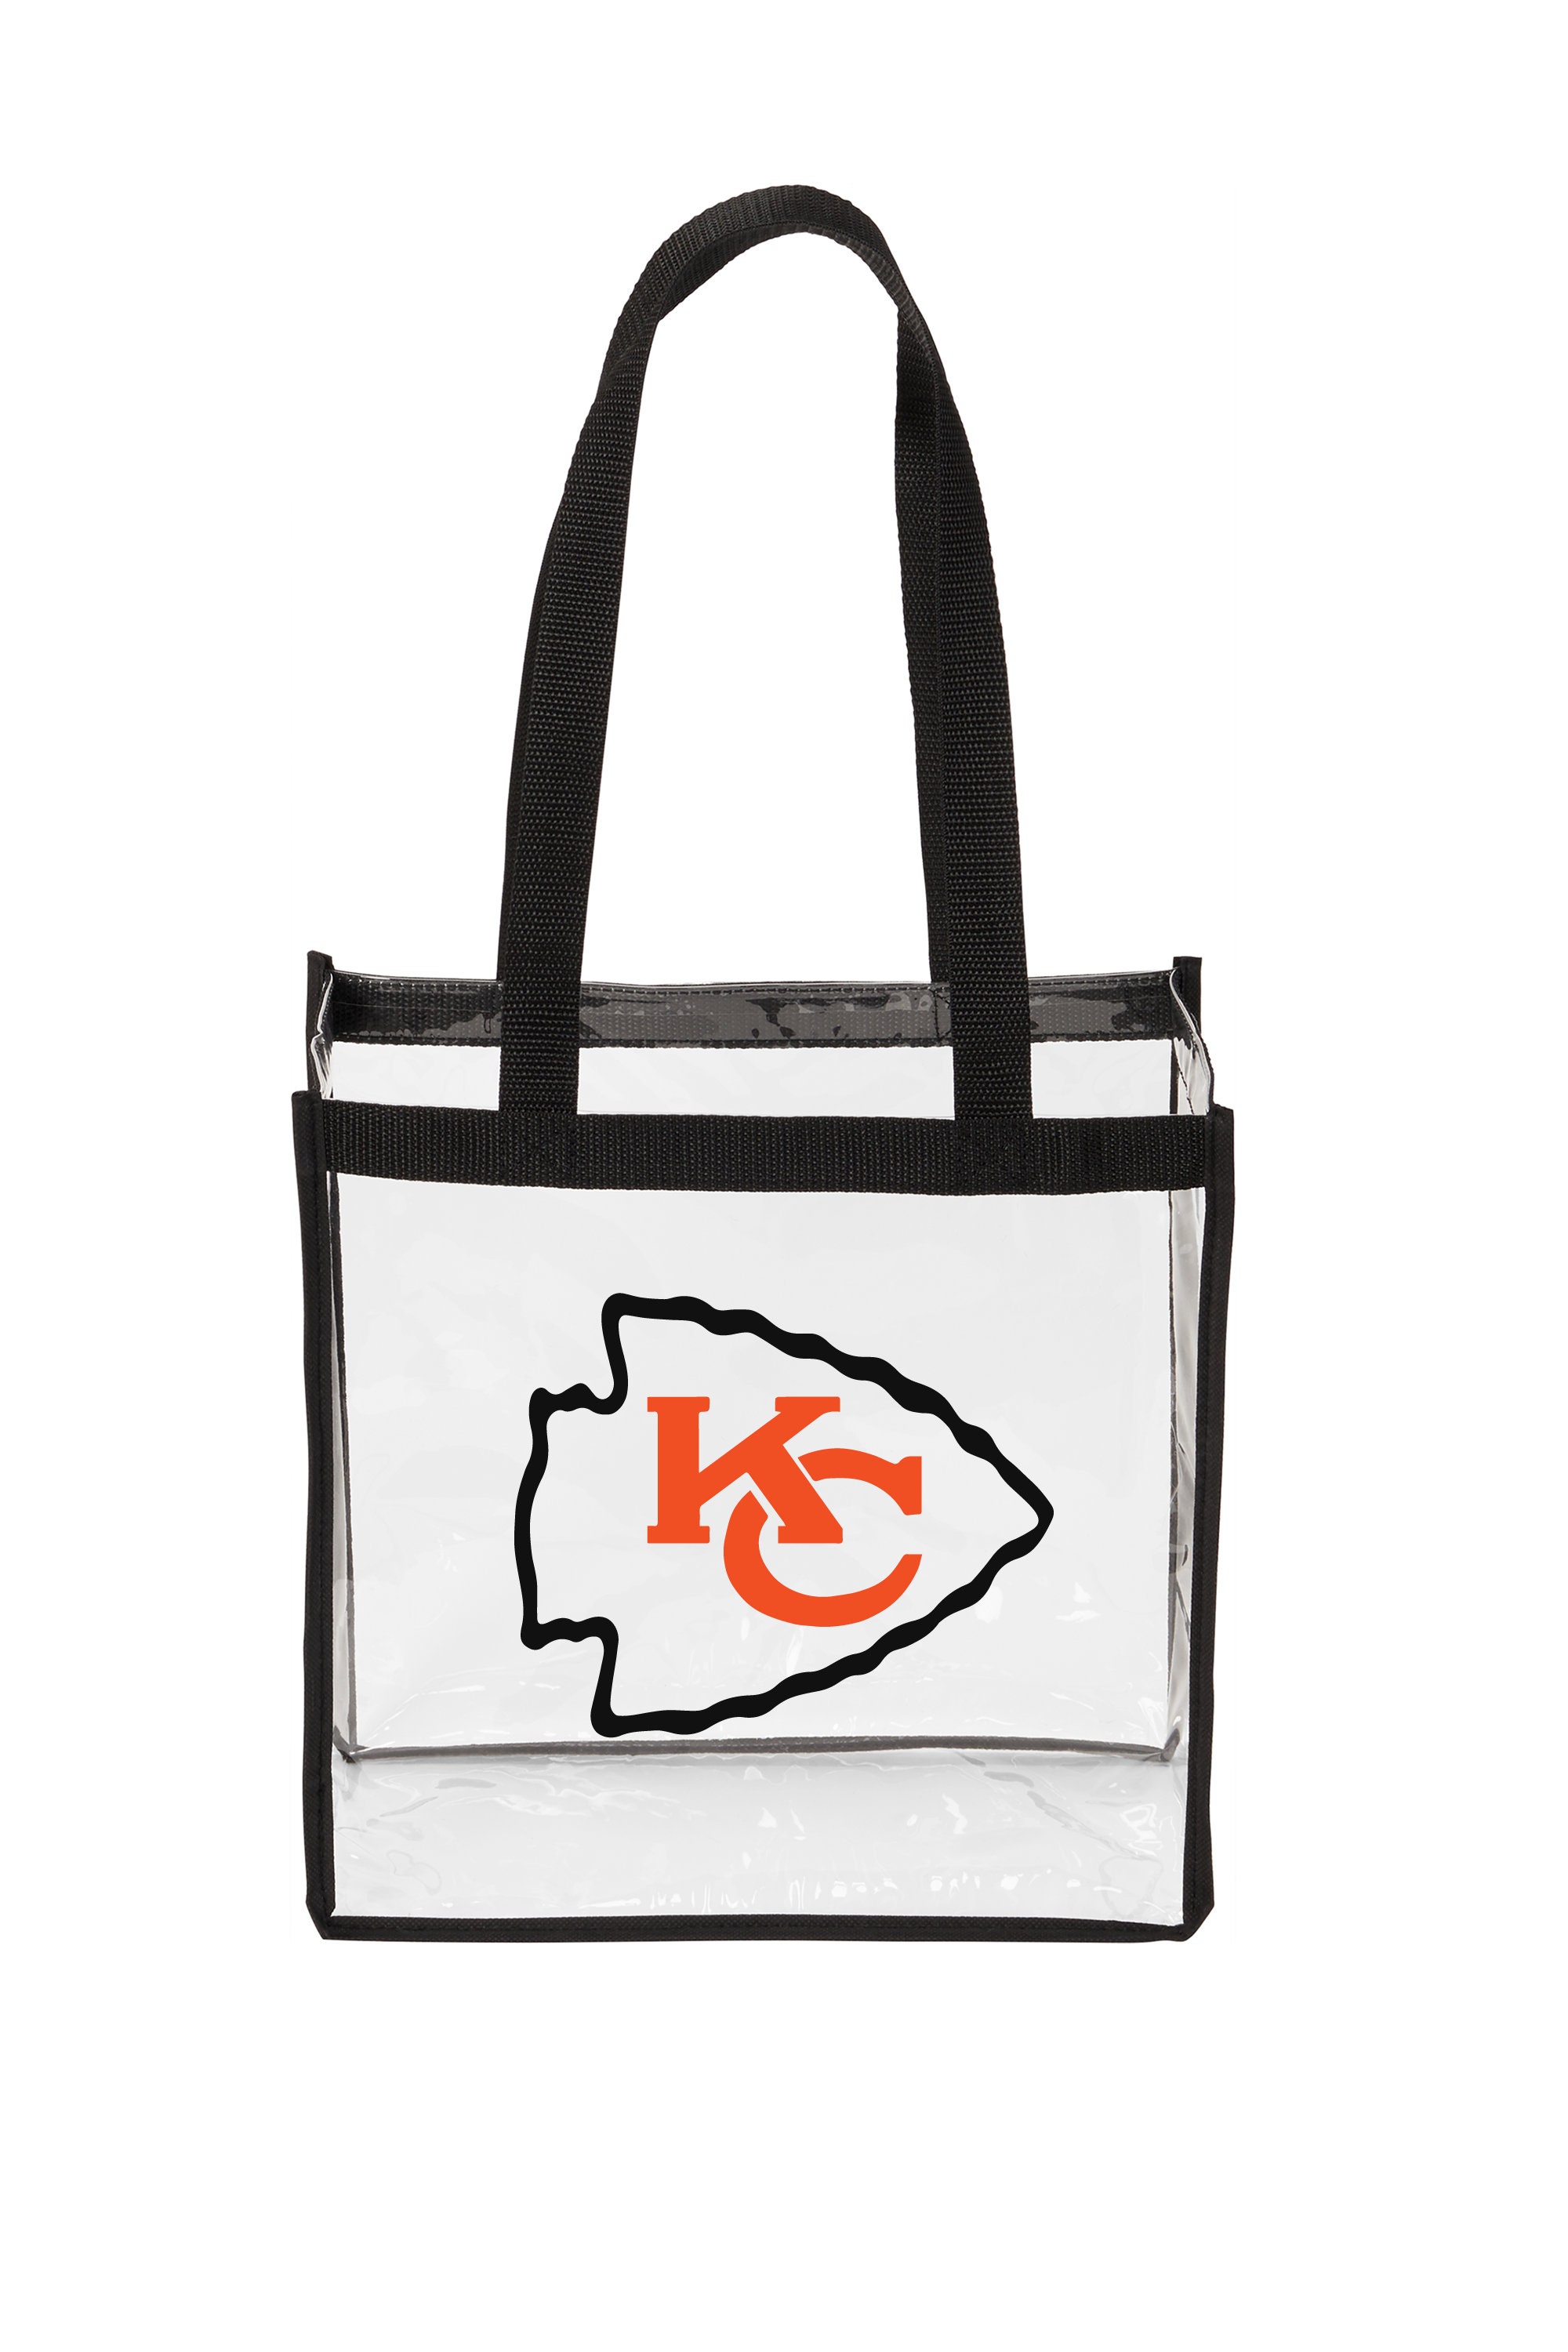 Kansas City Chiefs White Stadium Approved 12x12x6 Tote Clear Bag